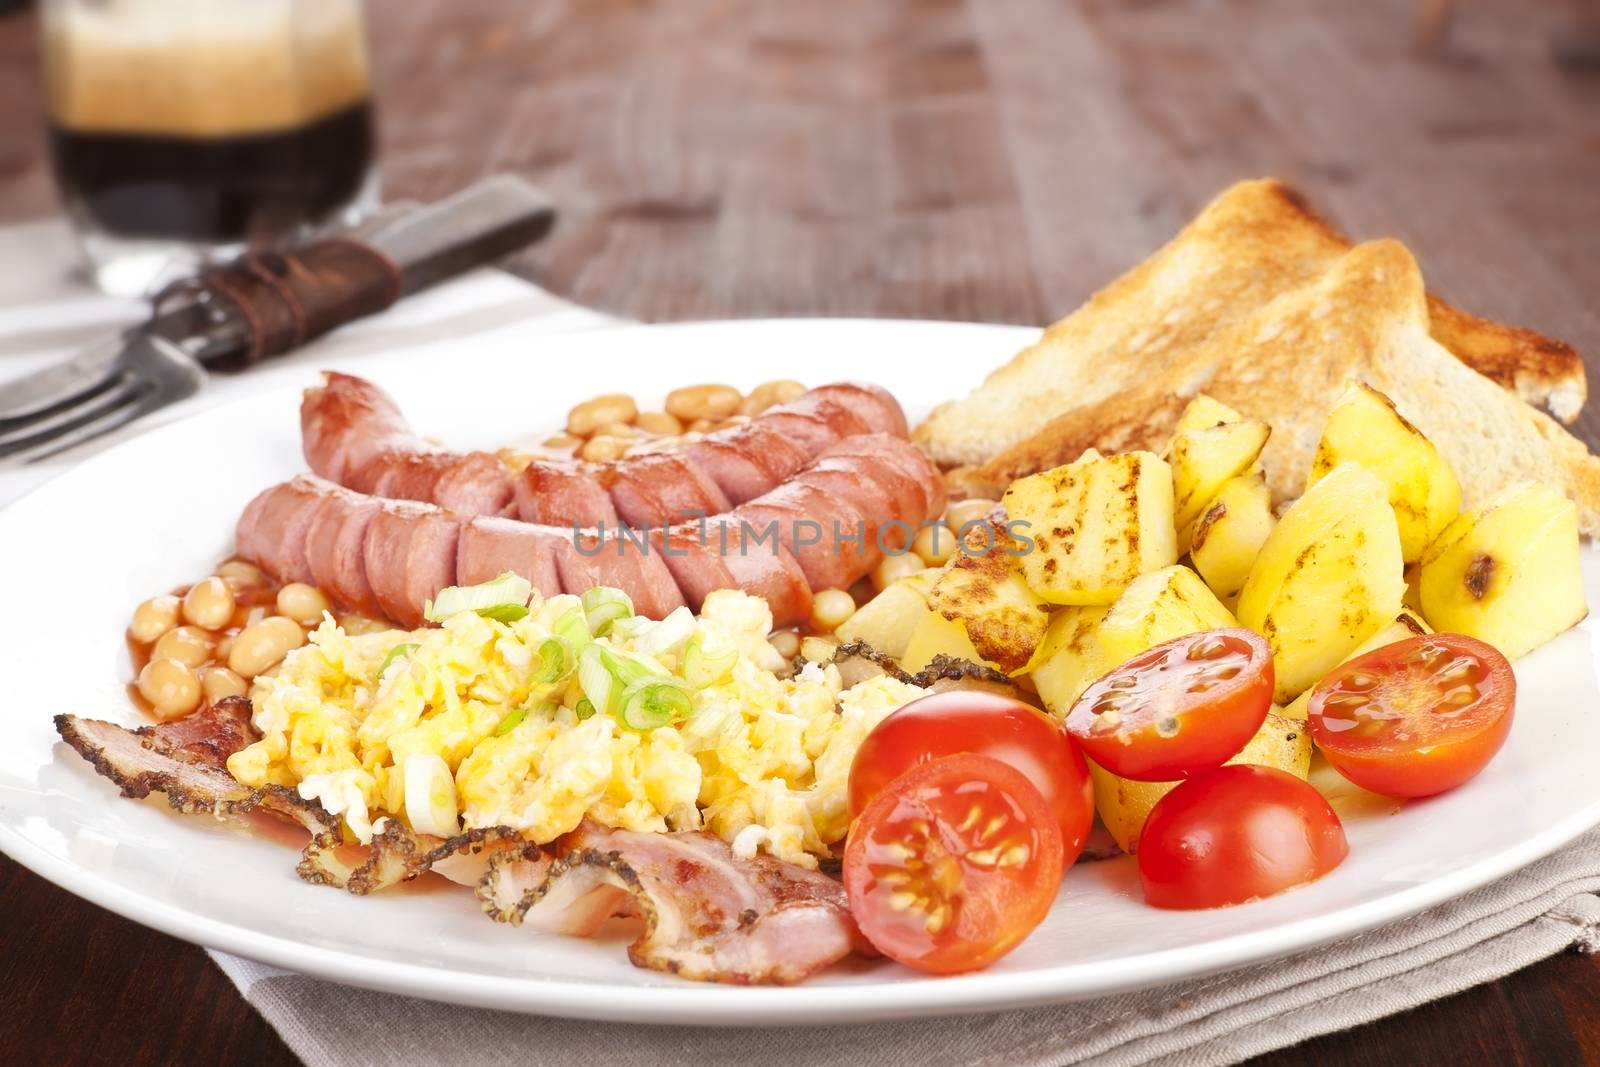 Delicious english breakfast, rustic style. Beans, sausages and scrambled eggs on white plate with fork. Coffee in background. Good morning concept.